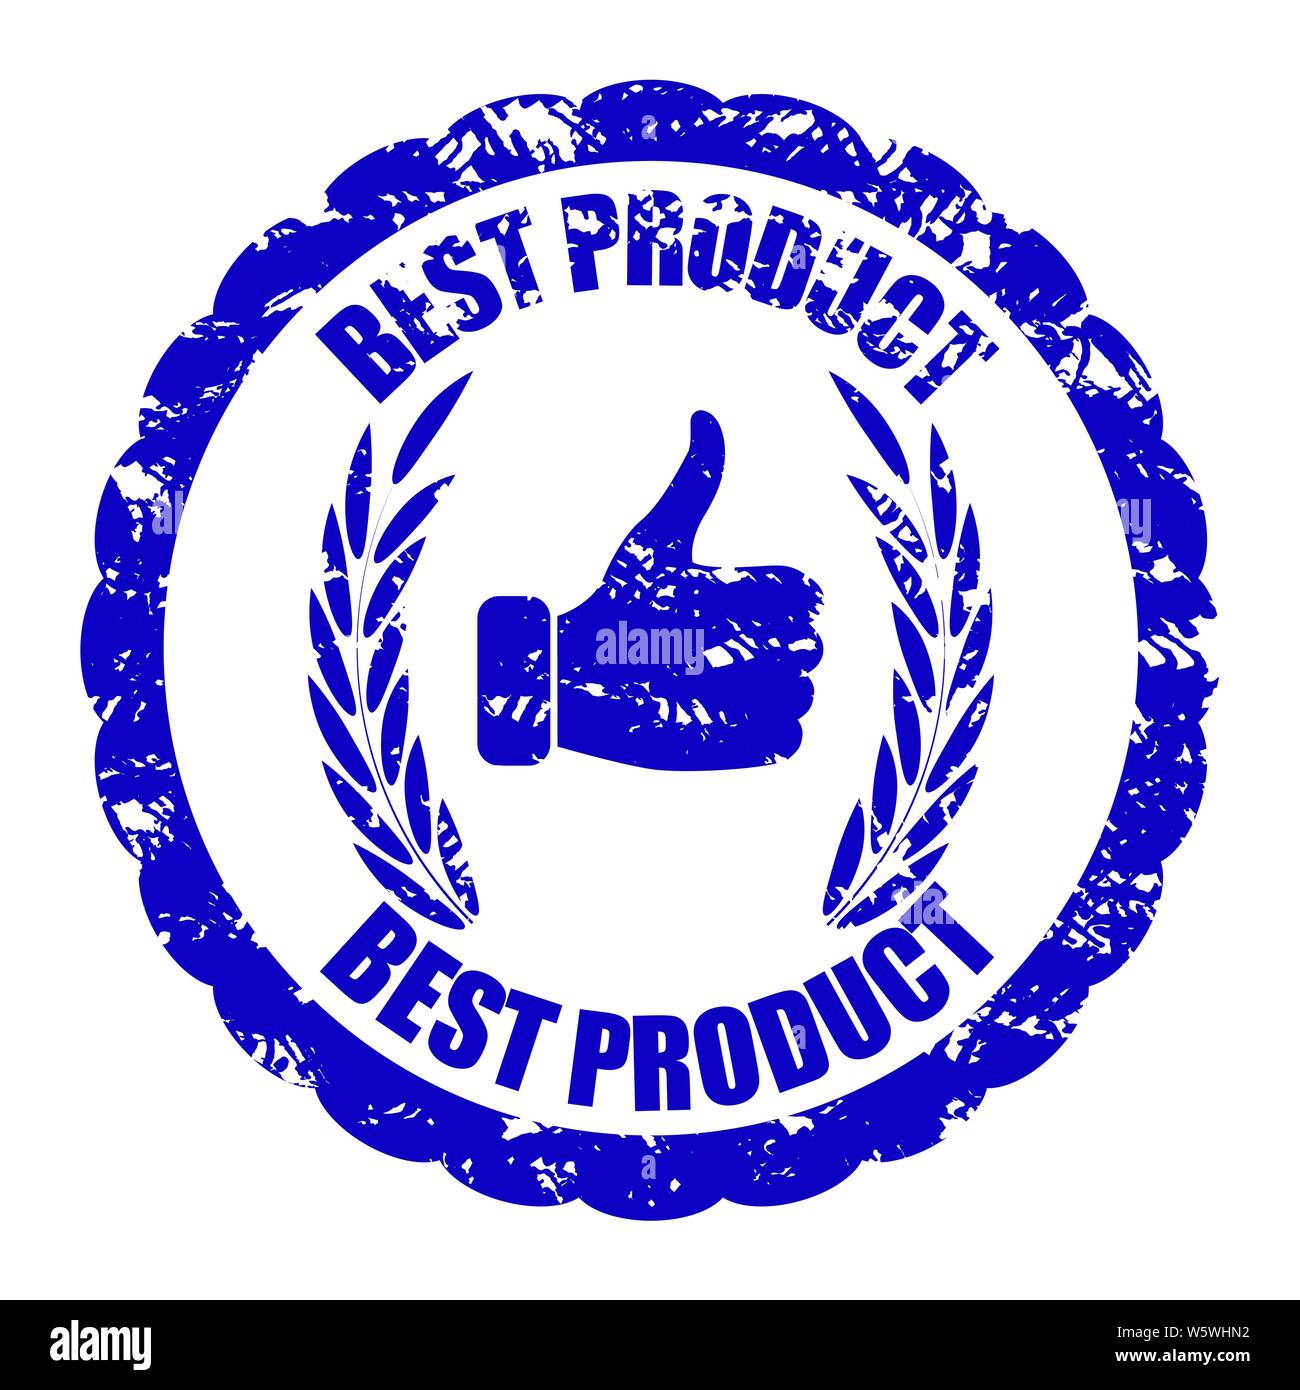 Best product quality rubber stamp for mark item.The best product seal with laurel wreath, consumer quality, guarantee mark for retail business, advert Stock Vector